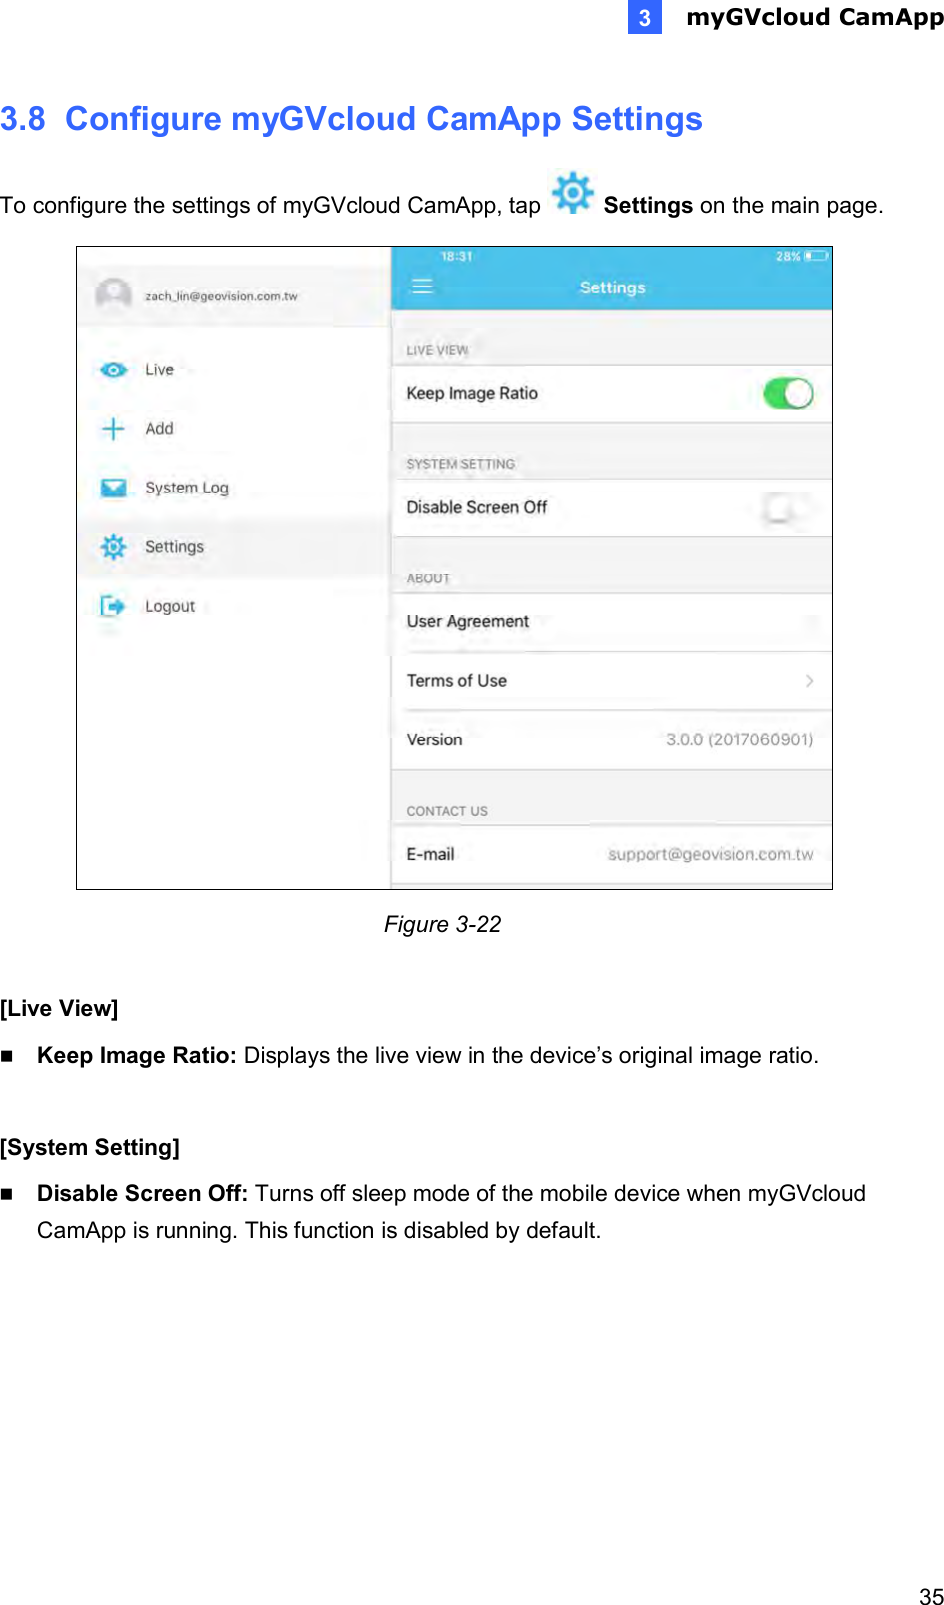  myGVcloud CamApp   353 3.8  Configure myGVcloud CamApp Settings To configure the settings of myGVcloud CamApp, tap   Settings on the main page.  Figure 3-22  [Live View]  Keep Image Ratio: Displays the live view in the device’s original image ratio.  [System Setting]  Disable Screen Off: Turns off sleep mode of the mobile device when myGVcloud CamApp is running. This function is disabled by default.  